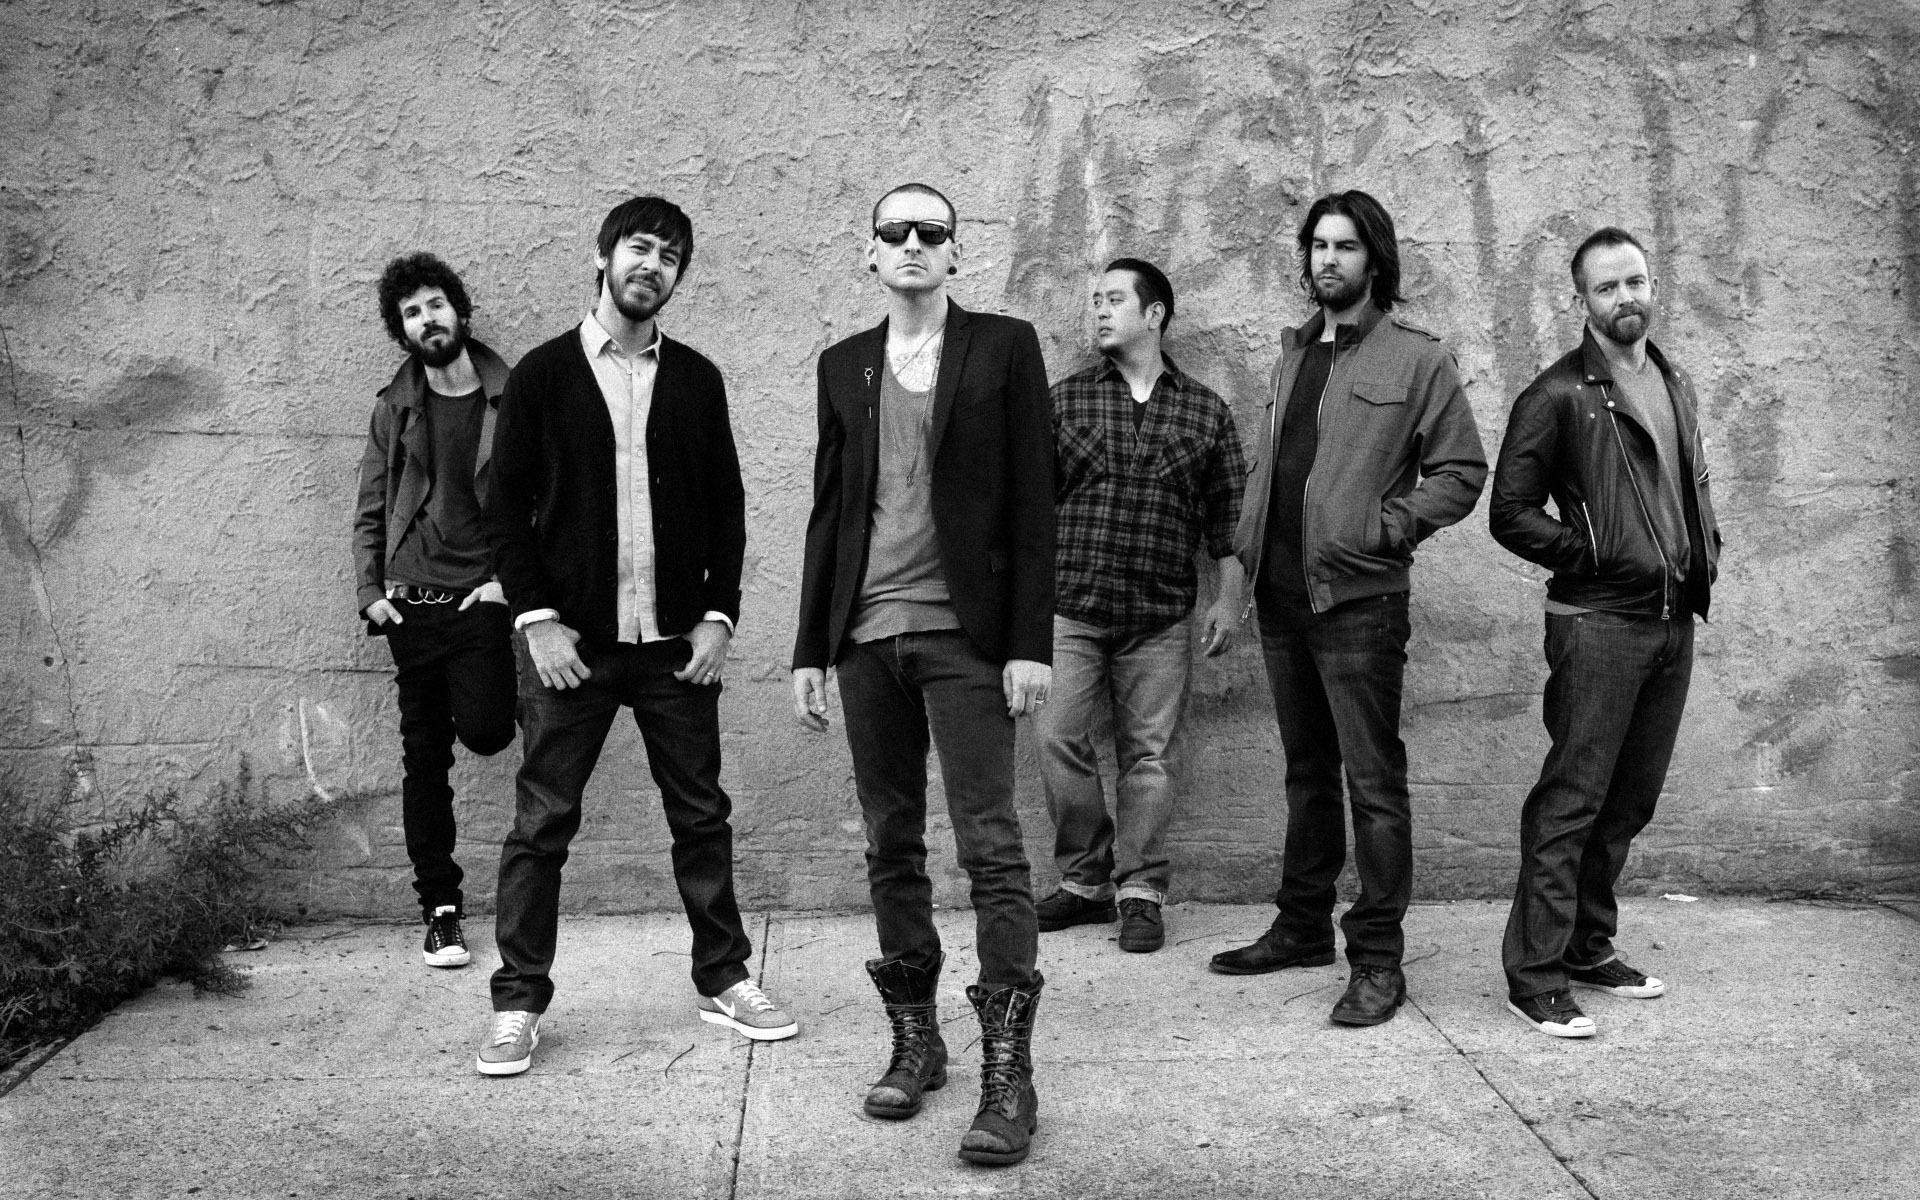 Linkin Park Wallpaper High Resolution and Quality Download